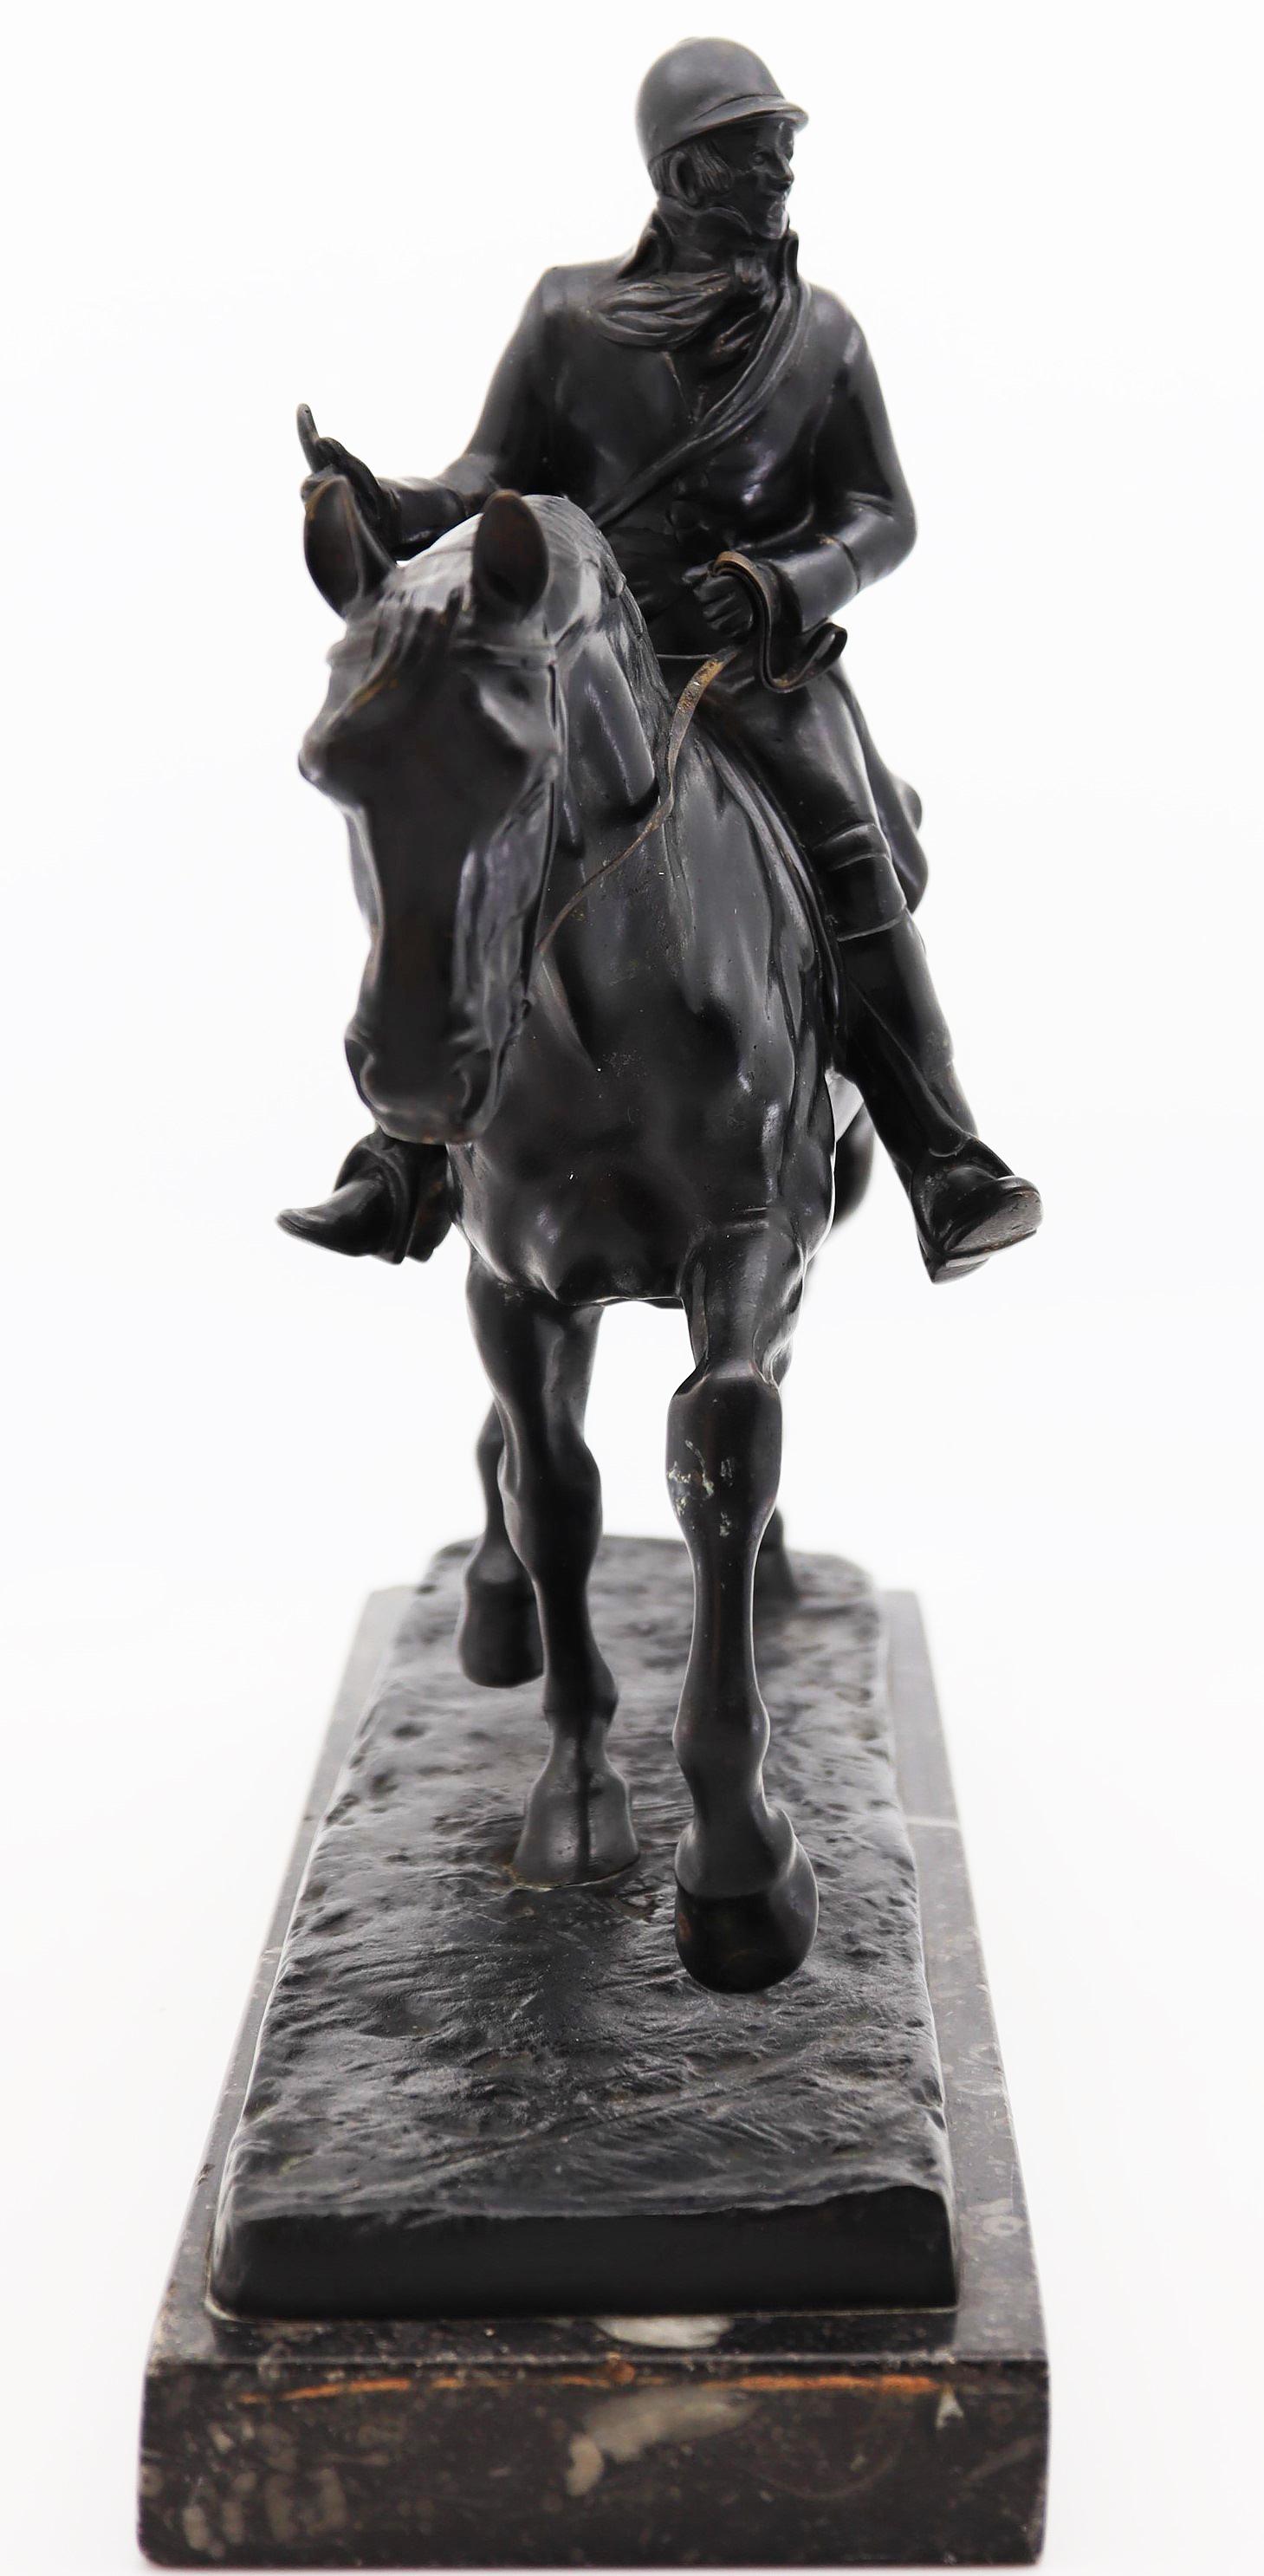 A bronze equestrian late Victorian/Edwardian statue of a huntsman on a riding horse by French animalier sculptor Gaston D’Illiers (1876-1932).
Signed on the lower right “G. d’Illiers” for Gaston D’Illiers. His specialty was to portray equestrian